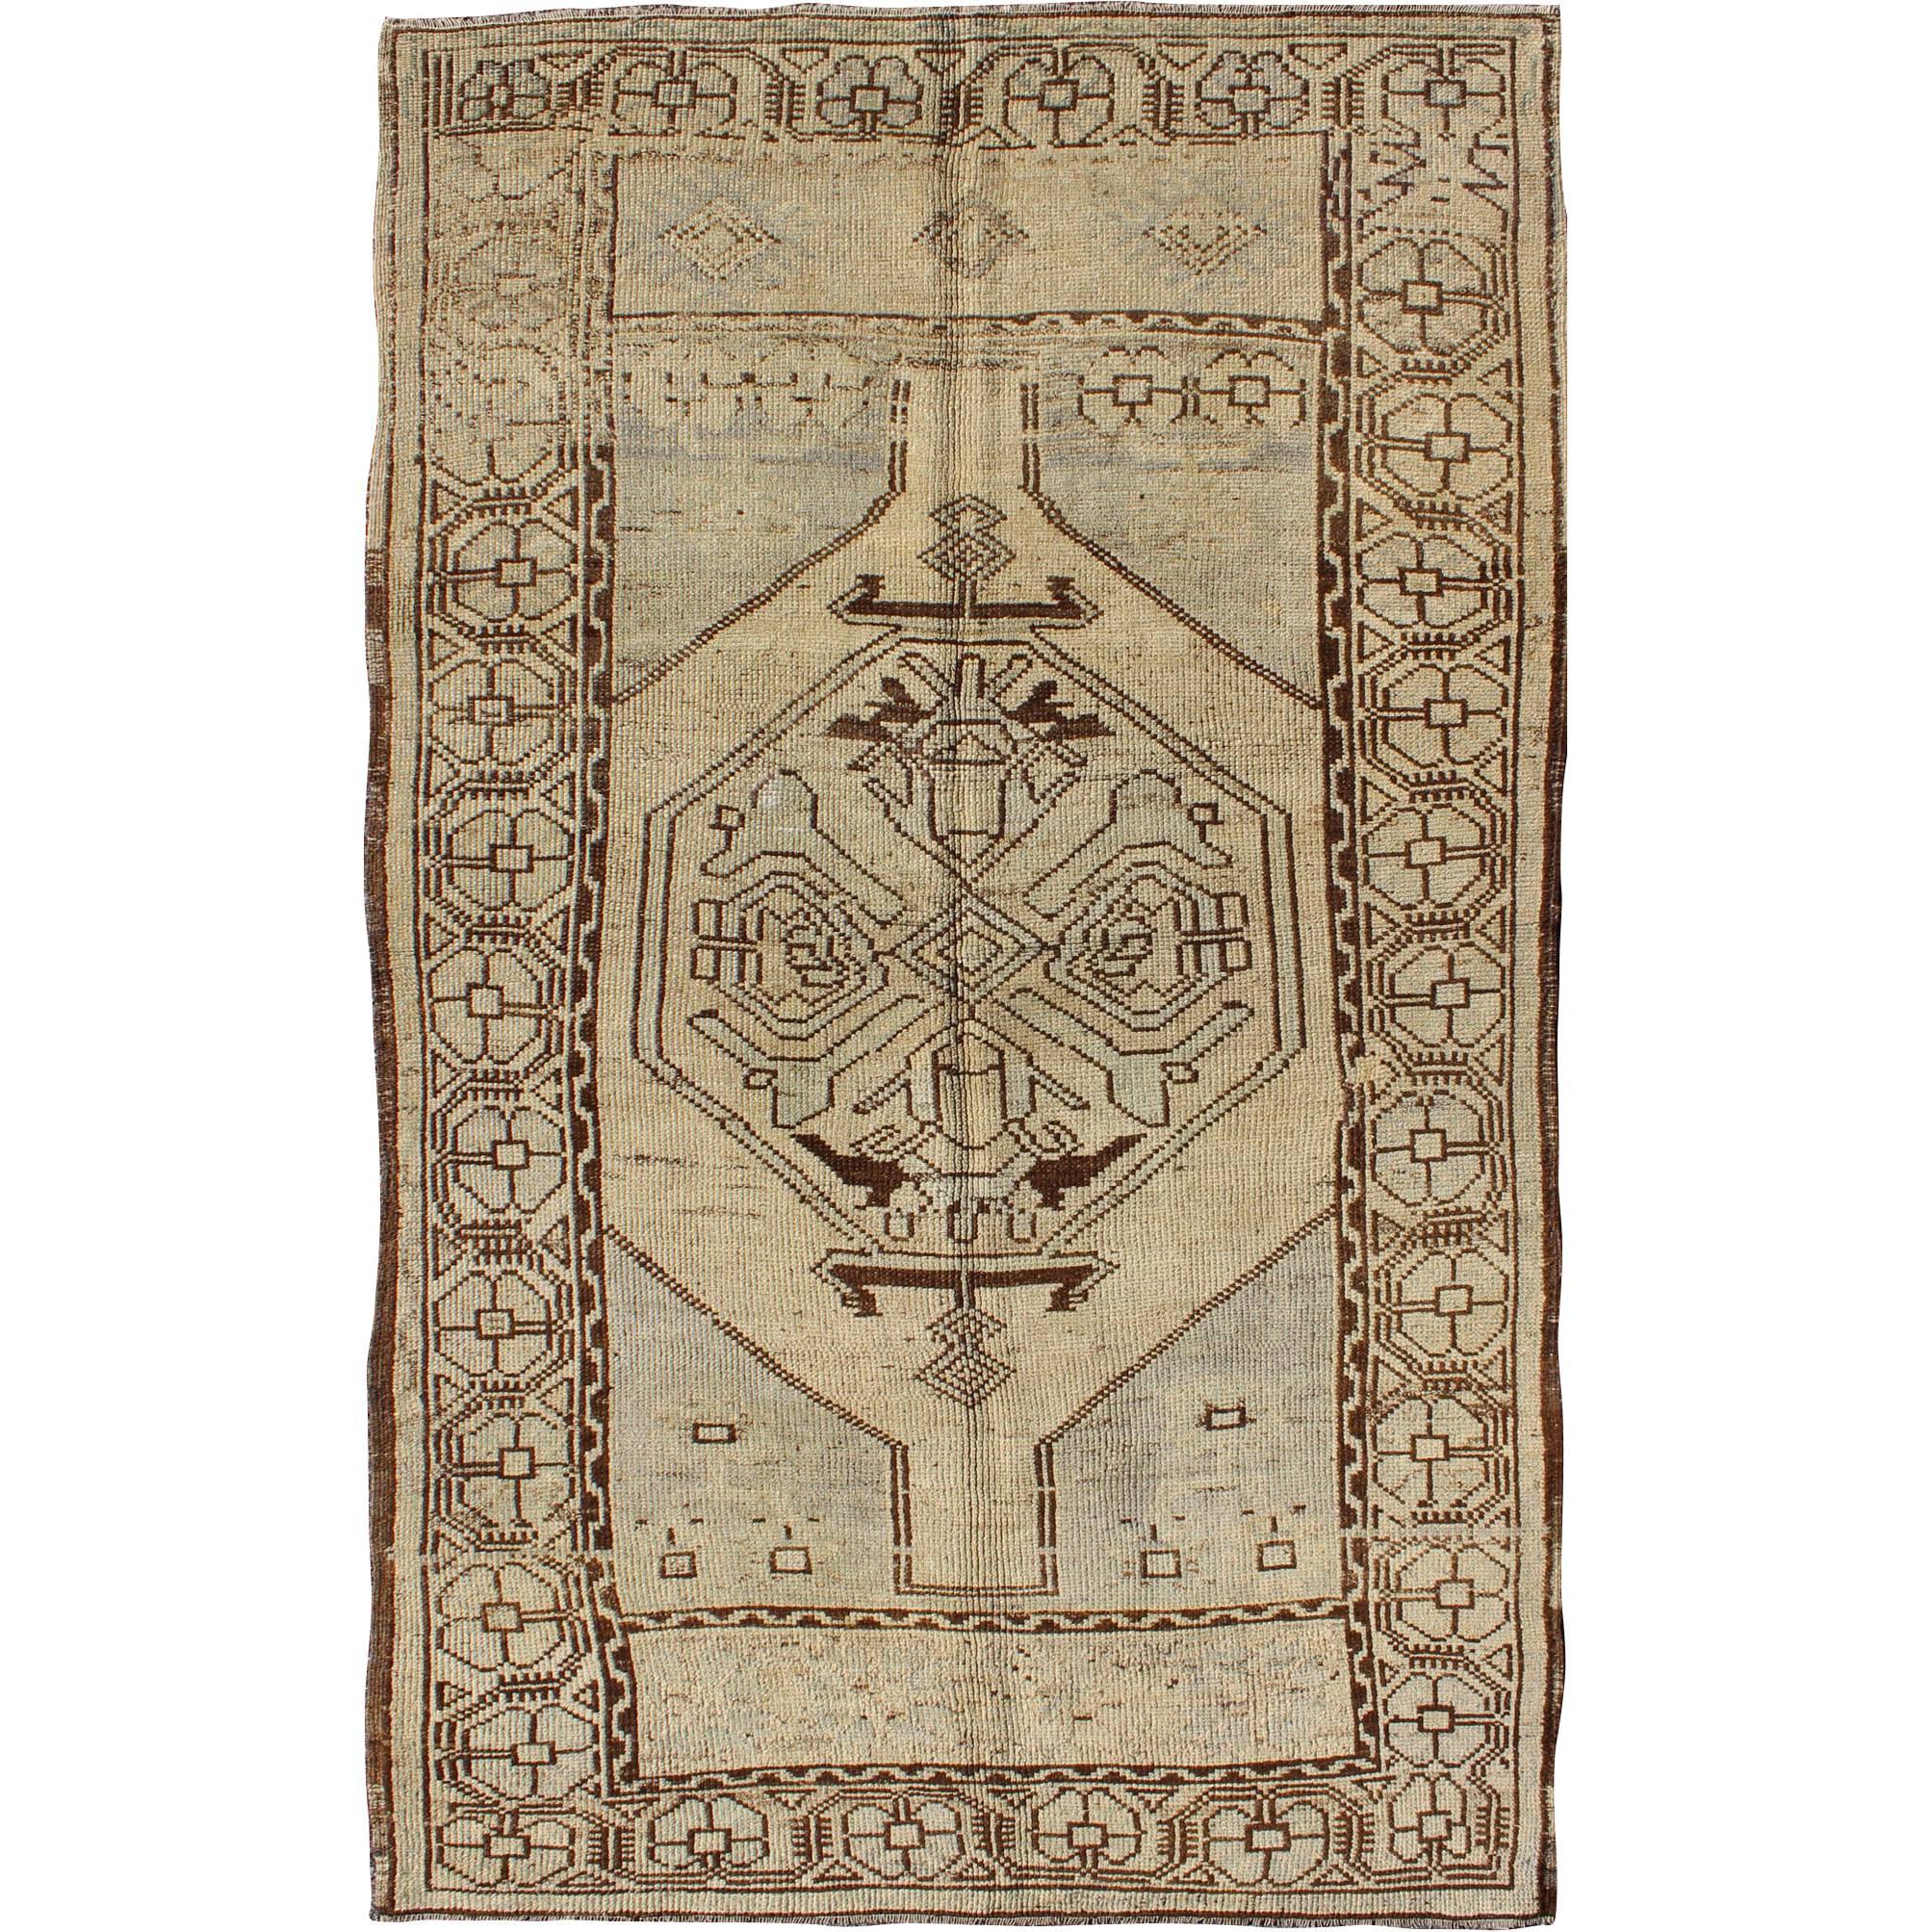 Geometric Tribal Vintage Turkish Oushak Rug in Brown, Cream, Light Blue and Tan For Sale